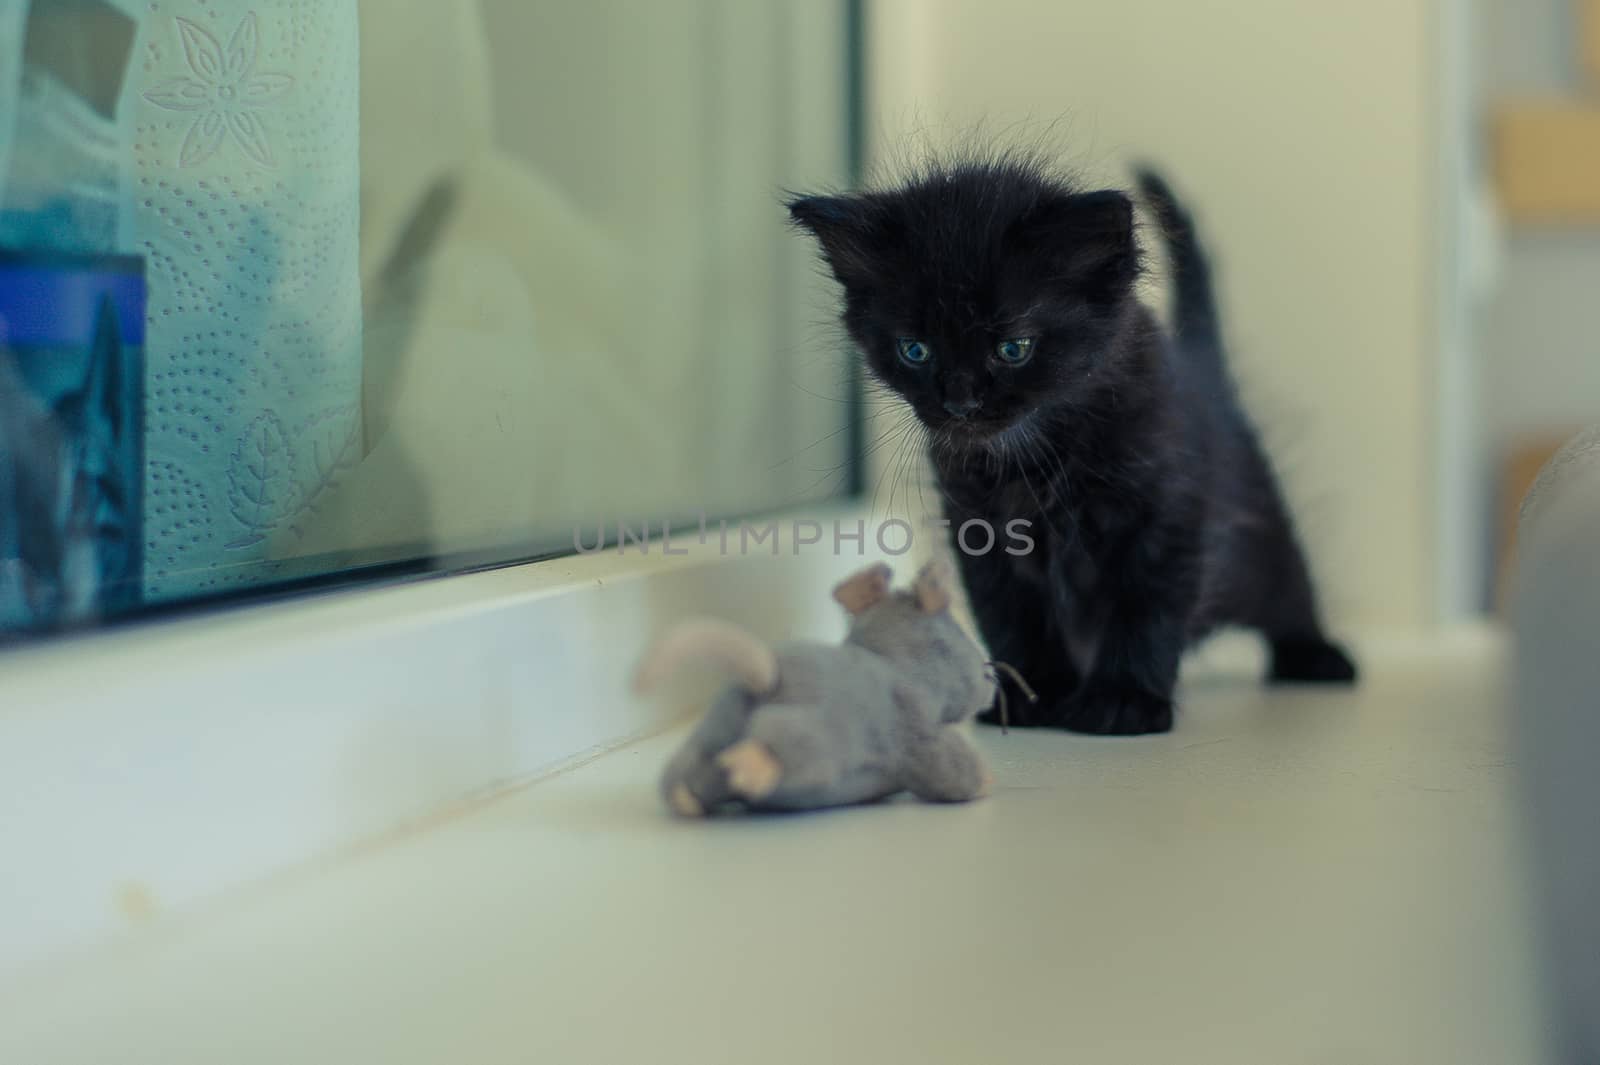 black kitten is played on the windowsill with a toy gray mouse